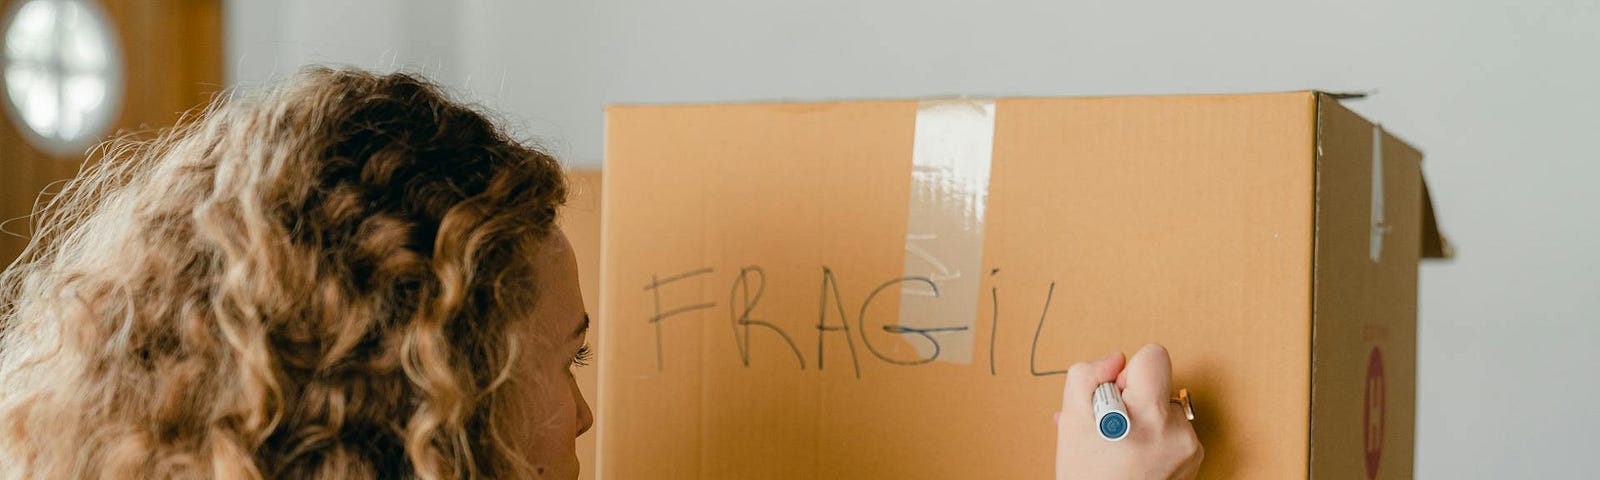 A woman with curly strawberry blonde hair writes “fragile” with a marker on a cardboard moving box.